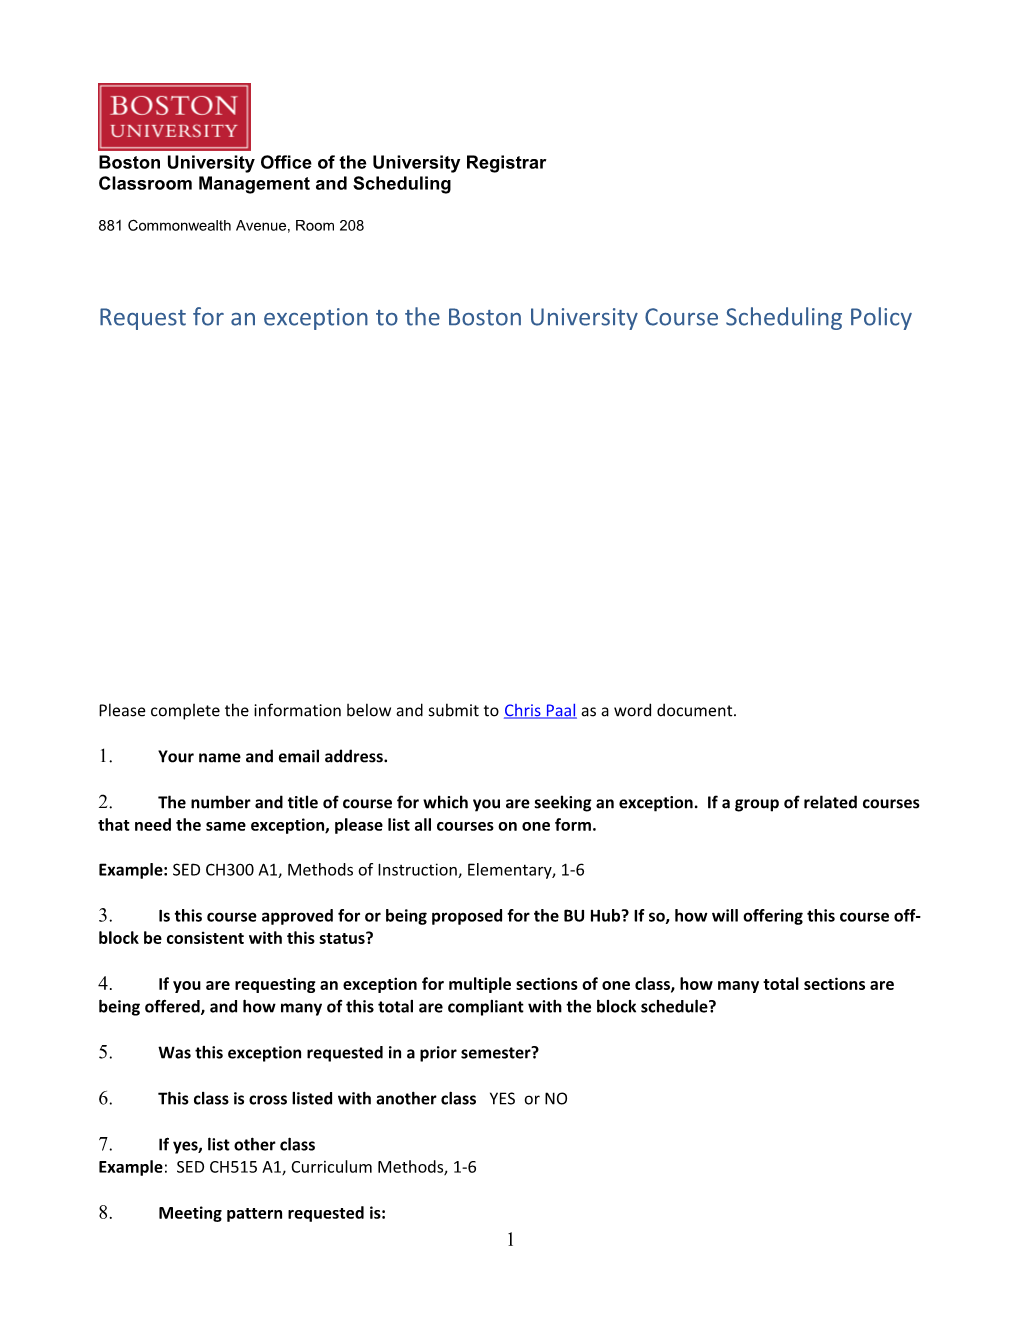 Request for an Exception to the Boston University Course Scheduling Policy